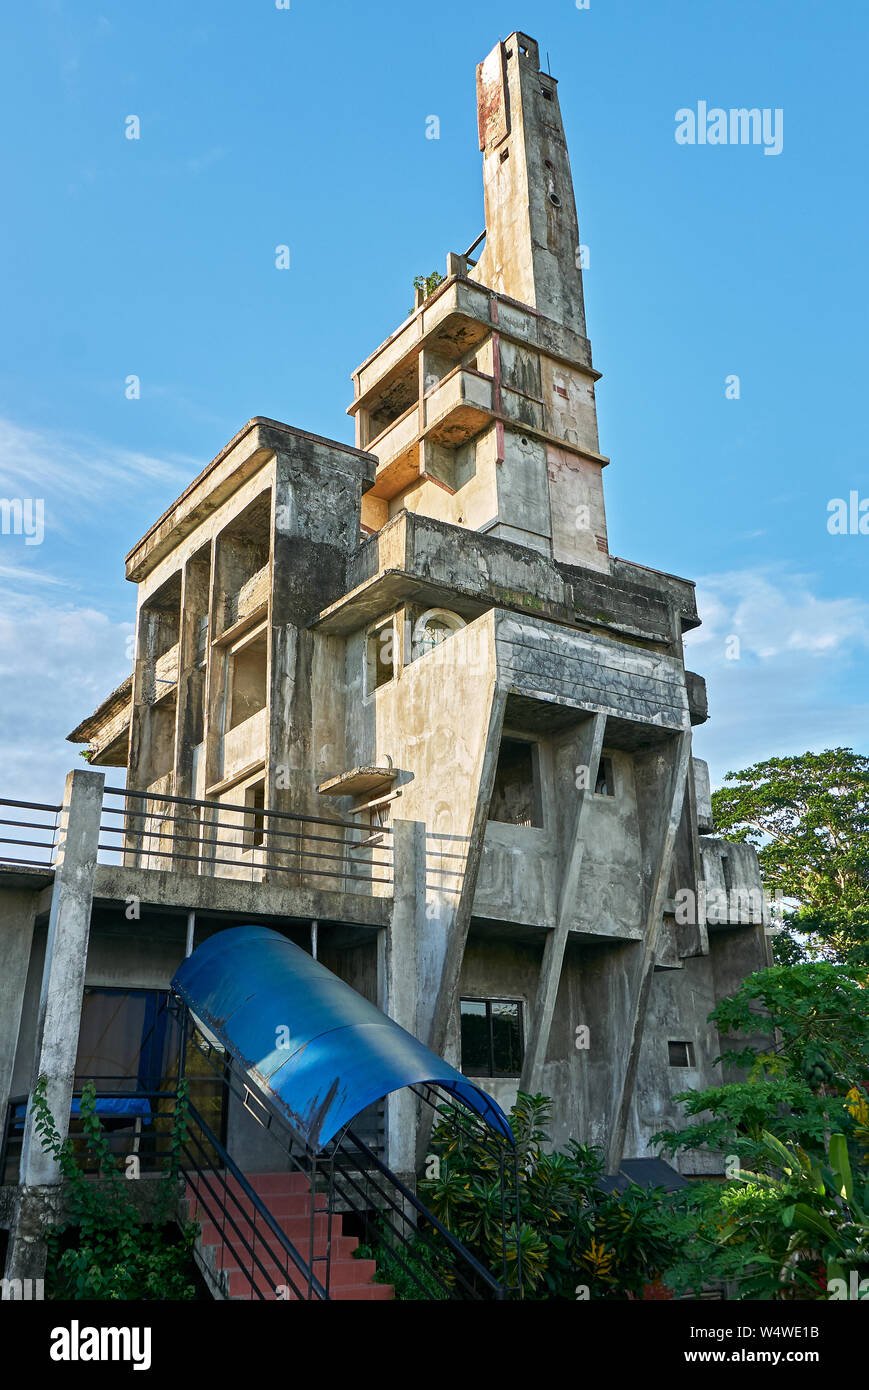 Low-angle view of an unusually unfinished weird concrete building with plenty floors, windows and a high tower. People living only in the ground level Stock Photo